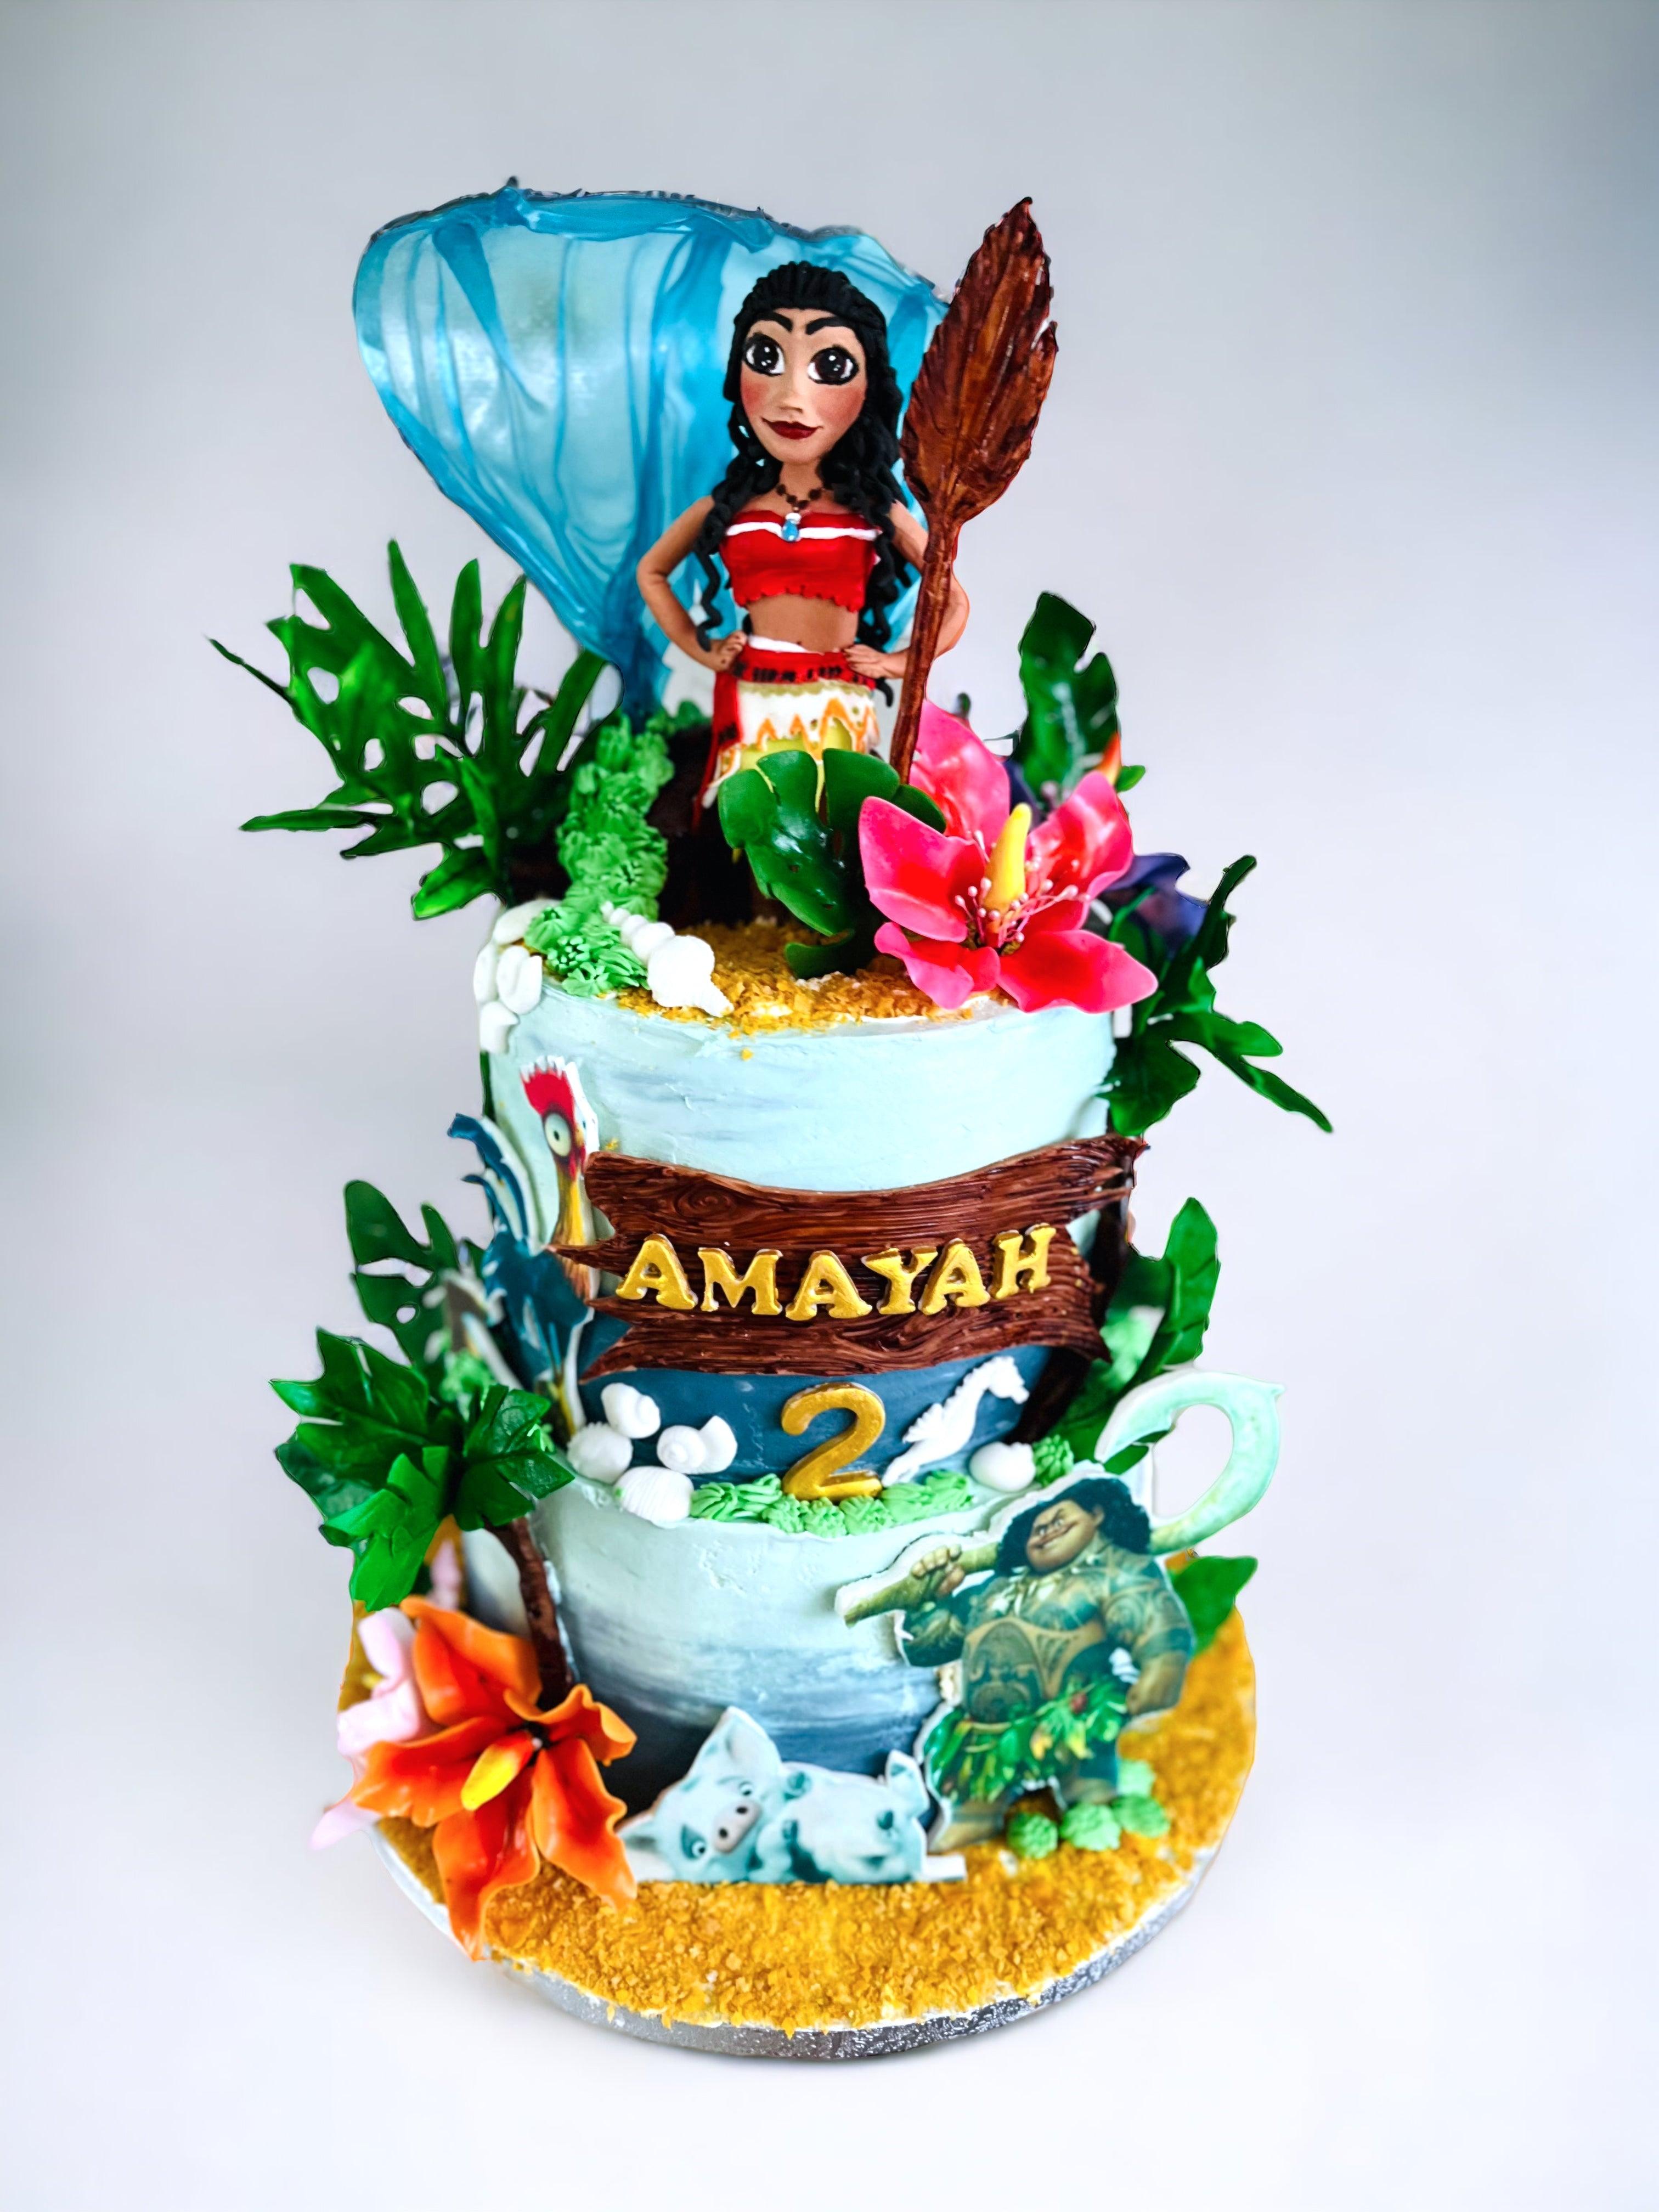 Just wanted to share the Moana themed cake I made for my friend's son's  birthday! : r/cakedecorating